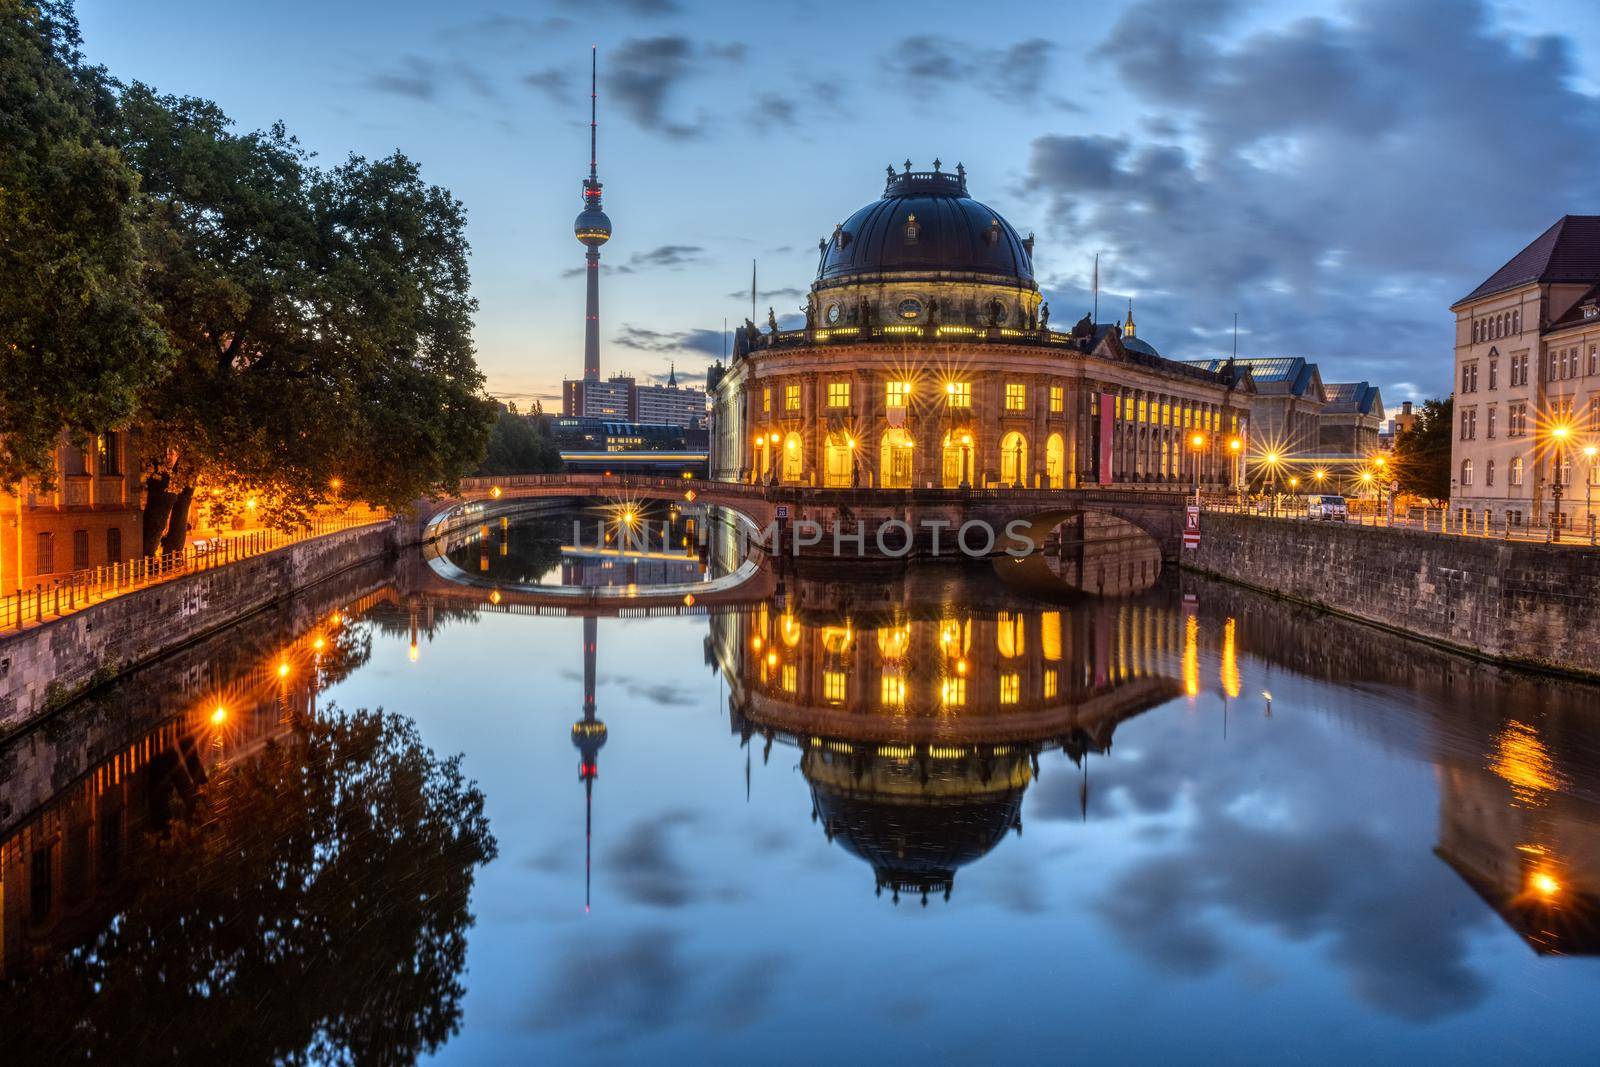 The Bode Museum, the Television Tower and the river Spree in Berlin before sunrise